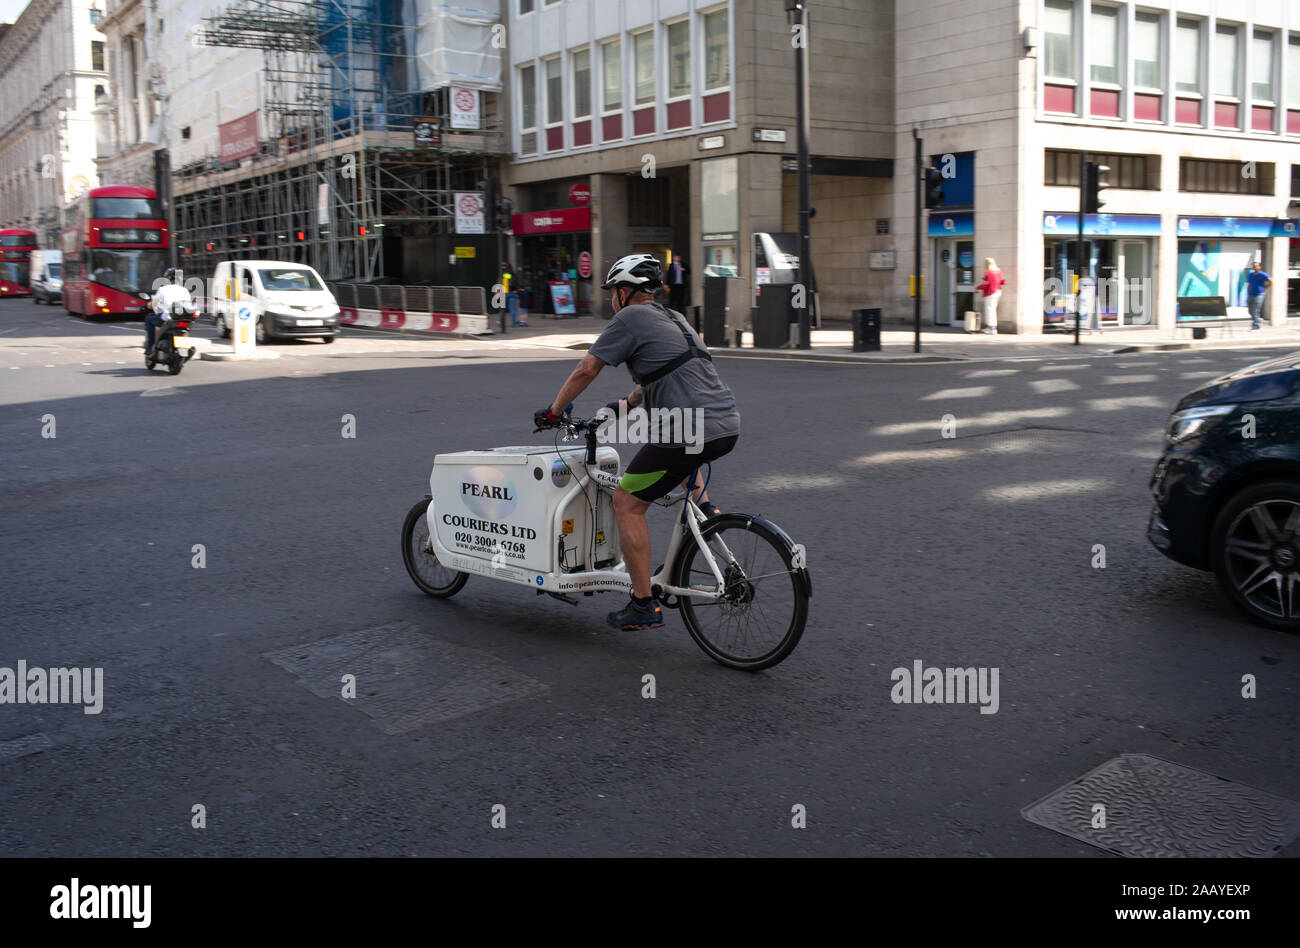 Pearl couriers cyclist out on delivers rides across a junction in London England. Stock Photo